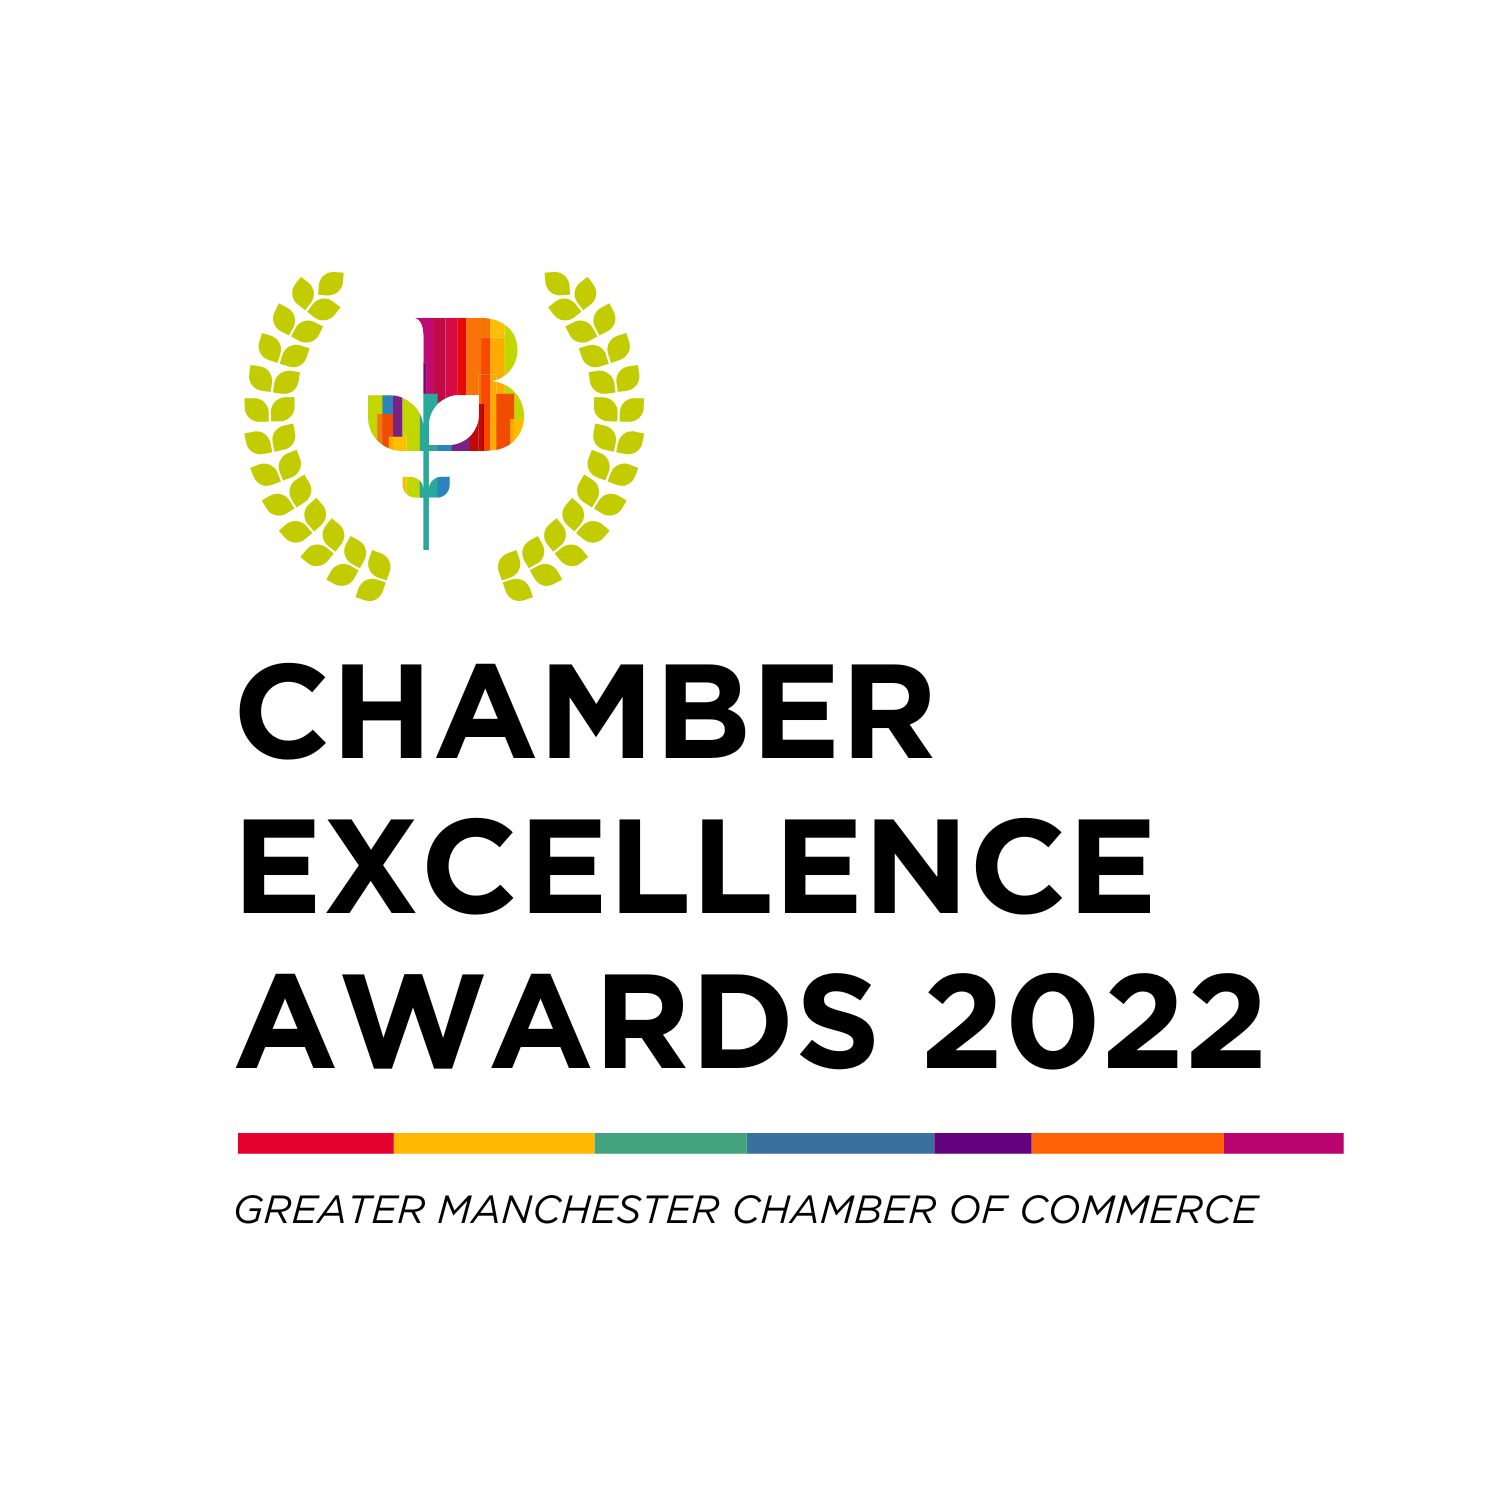 https://www.thinkdesignagency.co.uk/wp-content/uploads/2023/05/chamber-excellence-awards-2022.png